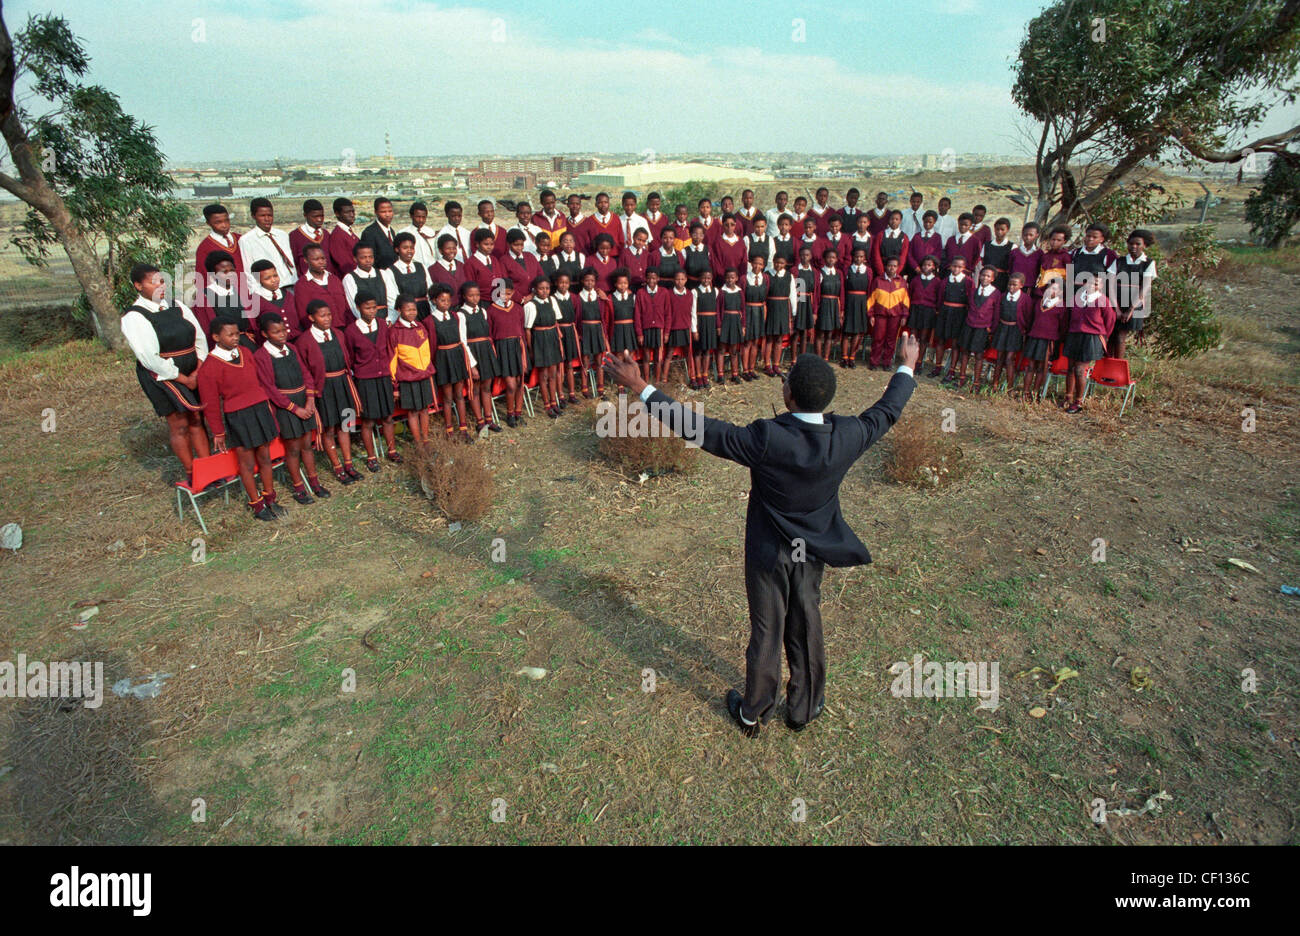 Black Schoolchildren sing in a school choir conducted by the music teacher in Port Elizabeth, South Africa. Stock Photo